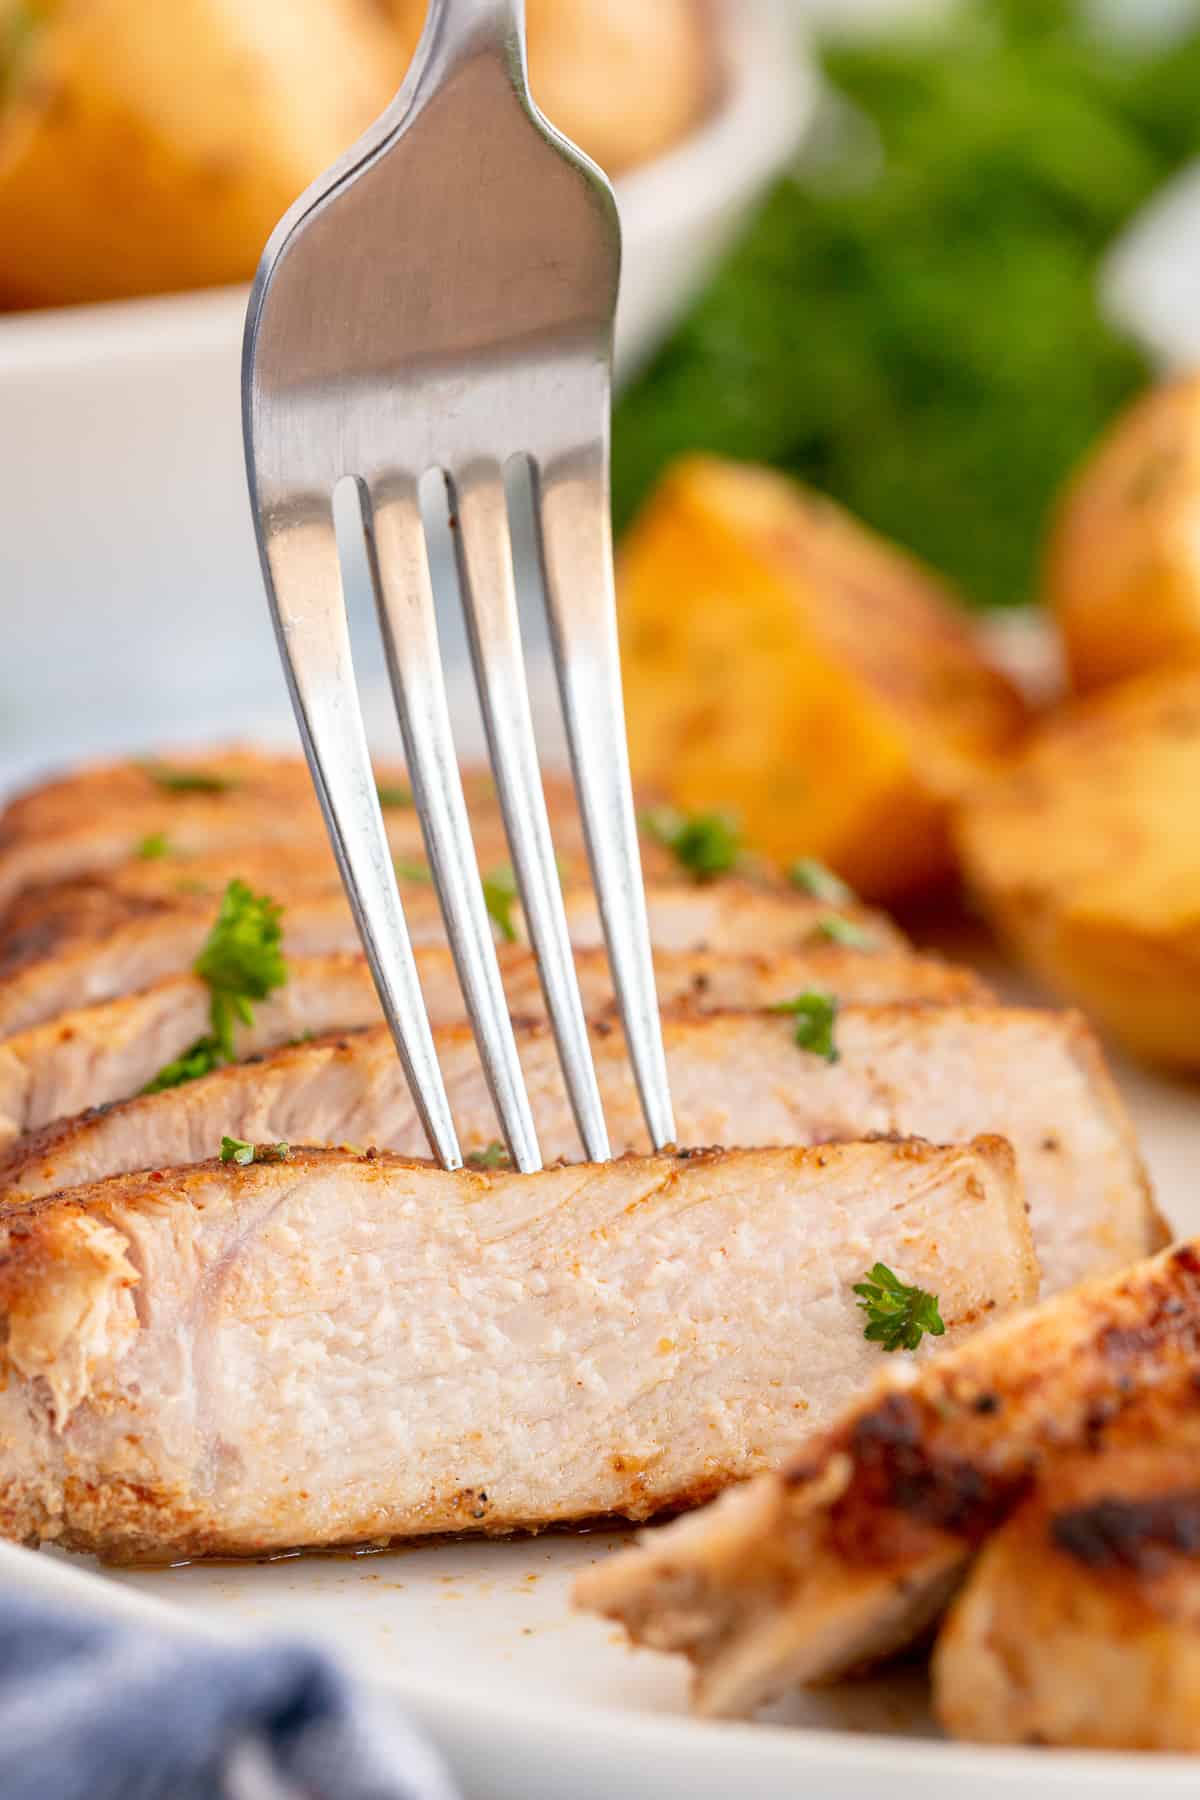 A fork pressing into a slice of pork chop on a dinner plate.